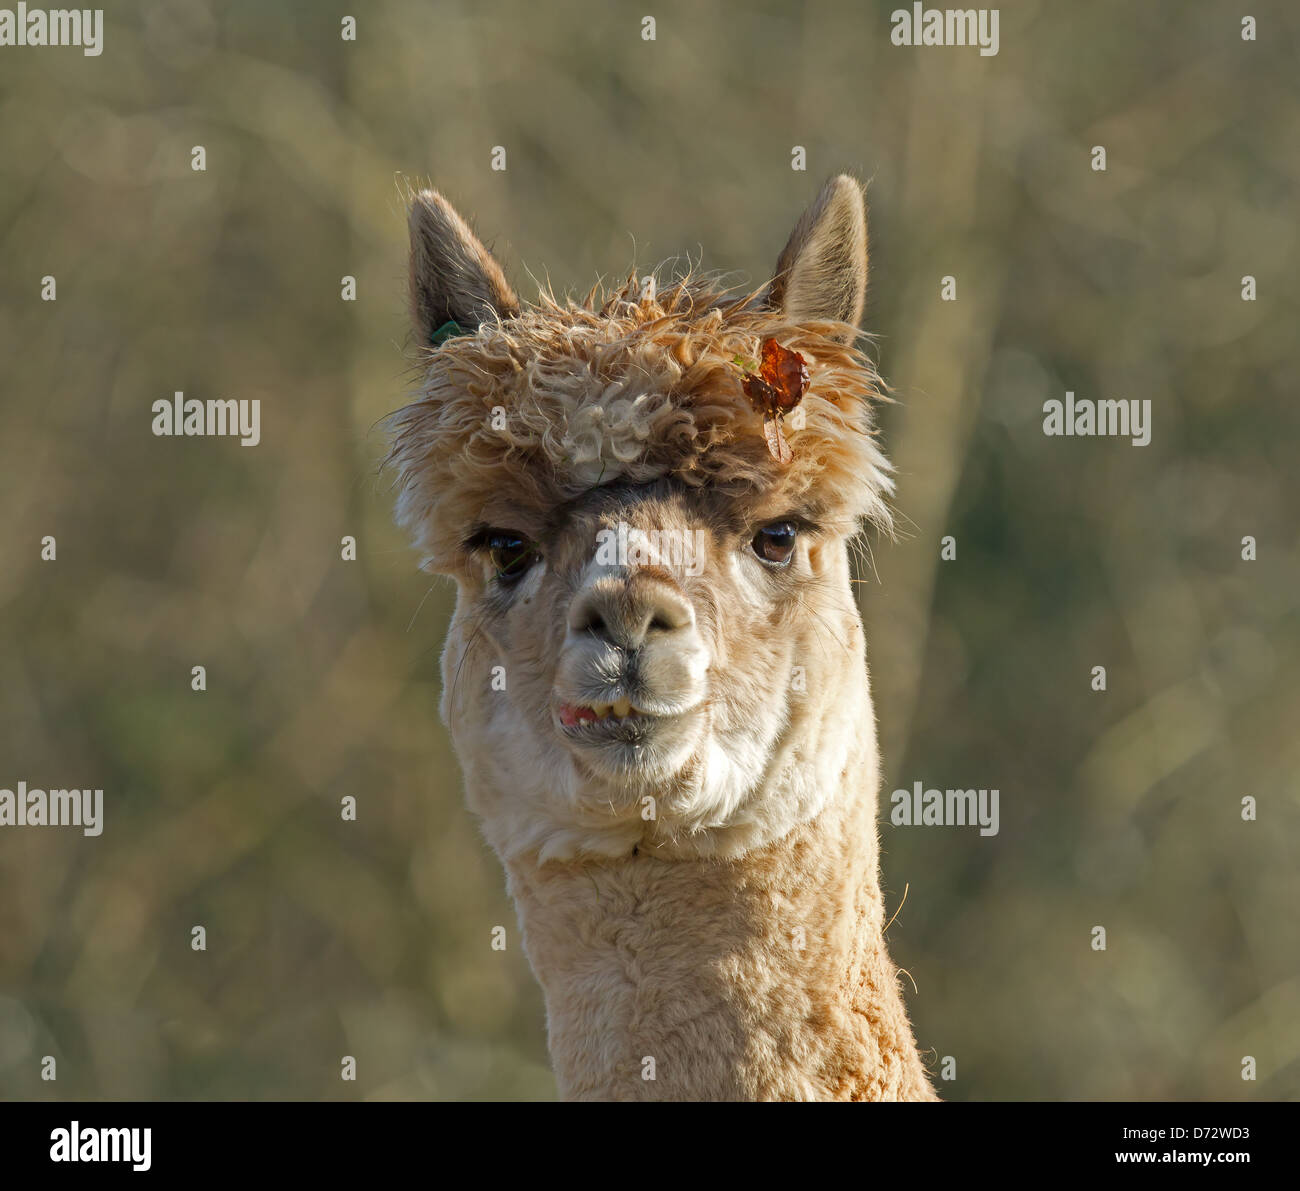 Head shot of Alpaca with leaf caught in hair Stock Photo